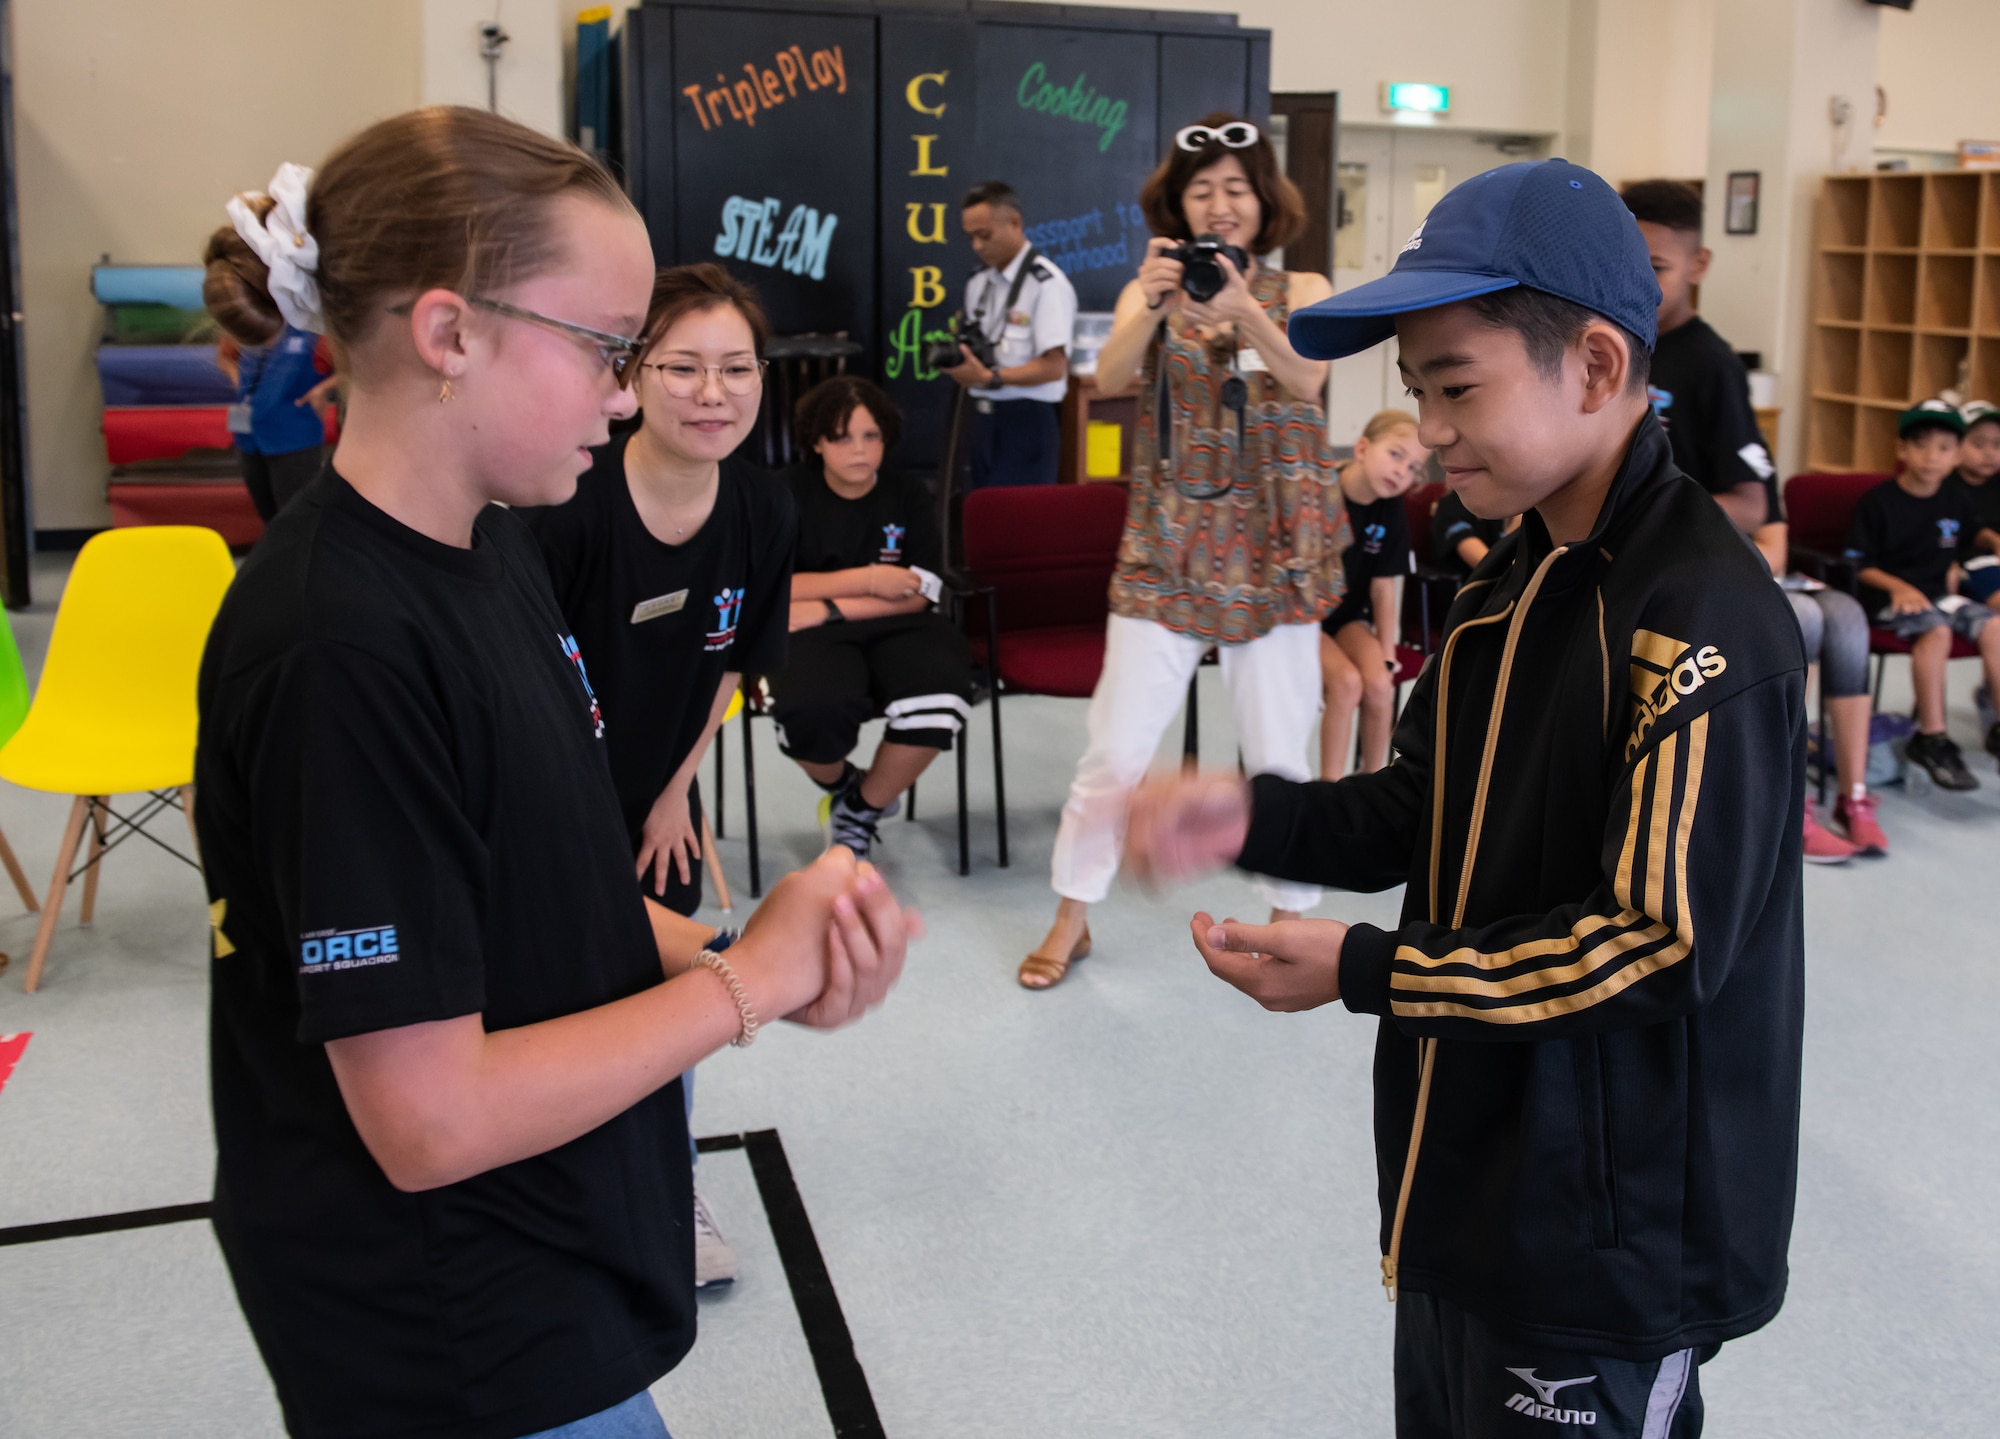 A child from the Kadena Youth Center and an Okinawan child compete in a Rock-Paper-Scissors Relay during Cultural Exchange Day, Sept. 28, 2019, at Kadena Air Base, Japan. The children were divided into six teams to play a variety of games, learn about each other’s culture and develop friendships. (U.S. Air Force photo by Staff Sgt. Micaiah Anthony)